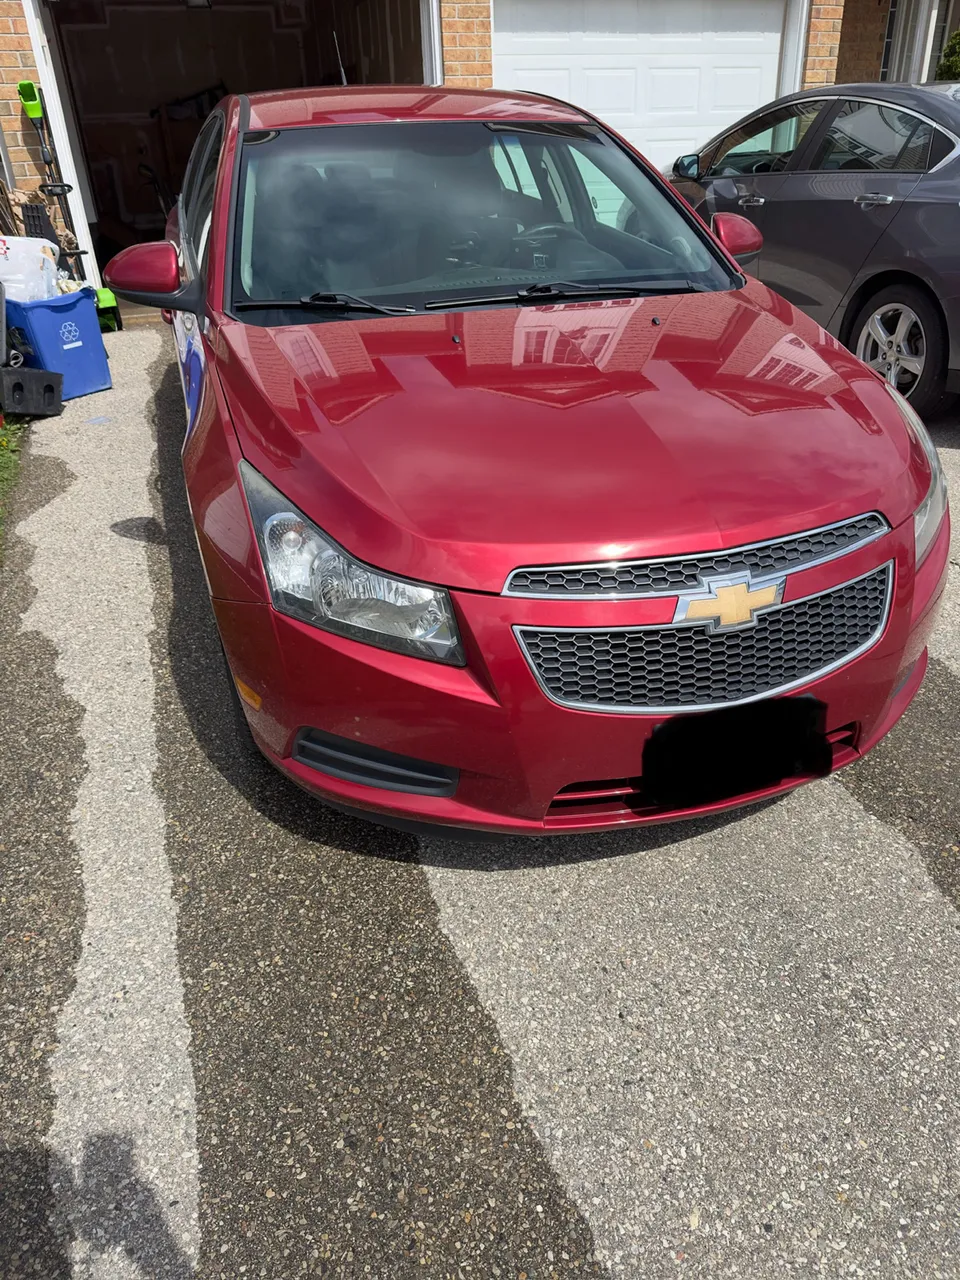 AS IS! LOW KM CLEAN 2011 CHEVY CRUZE